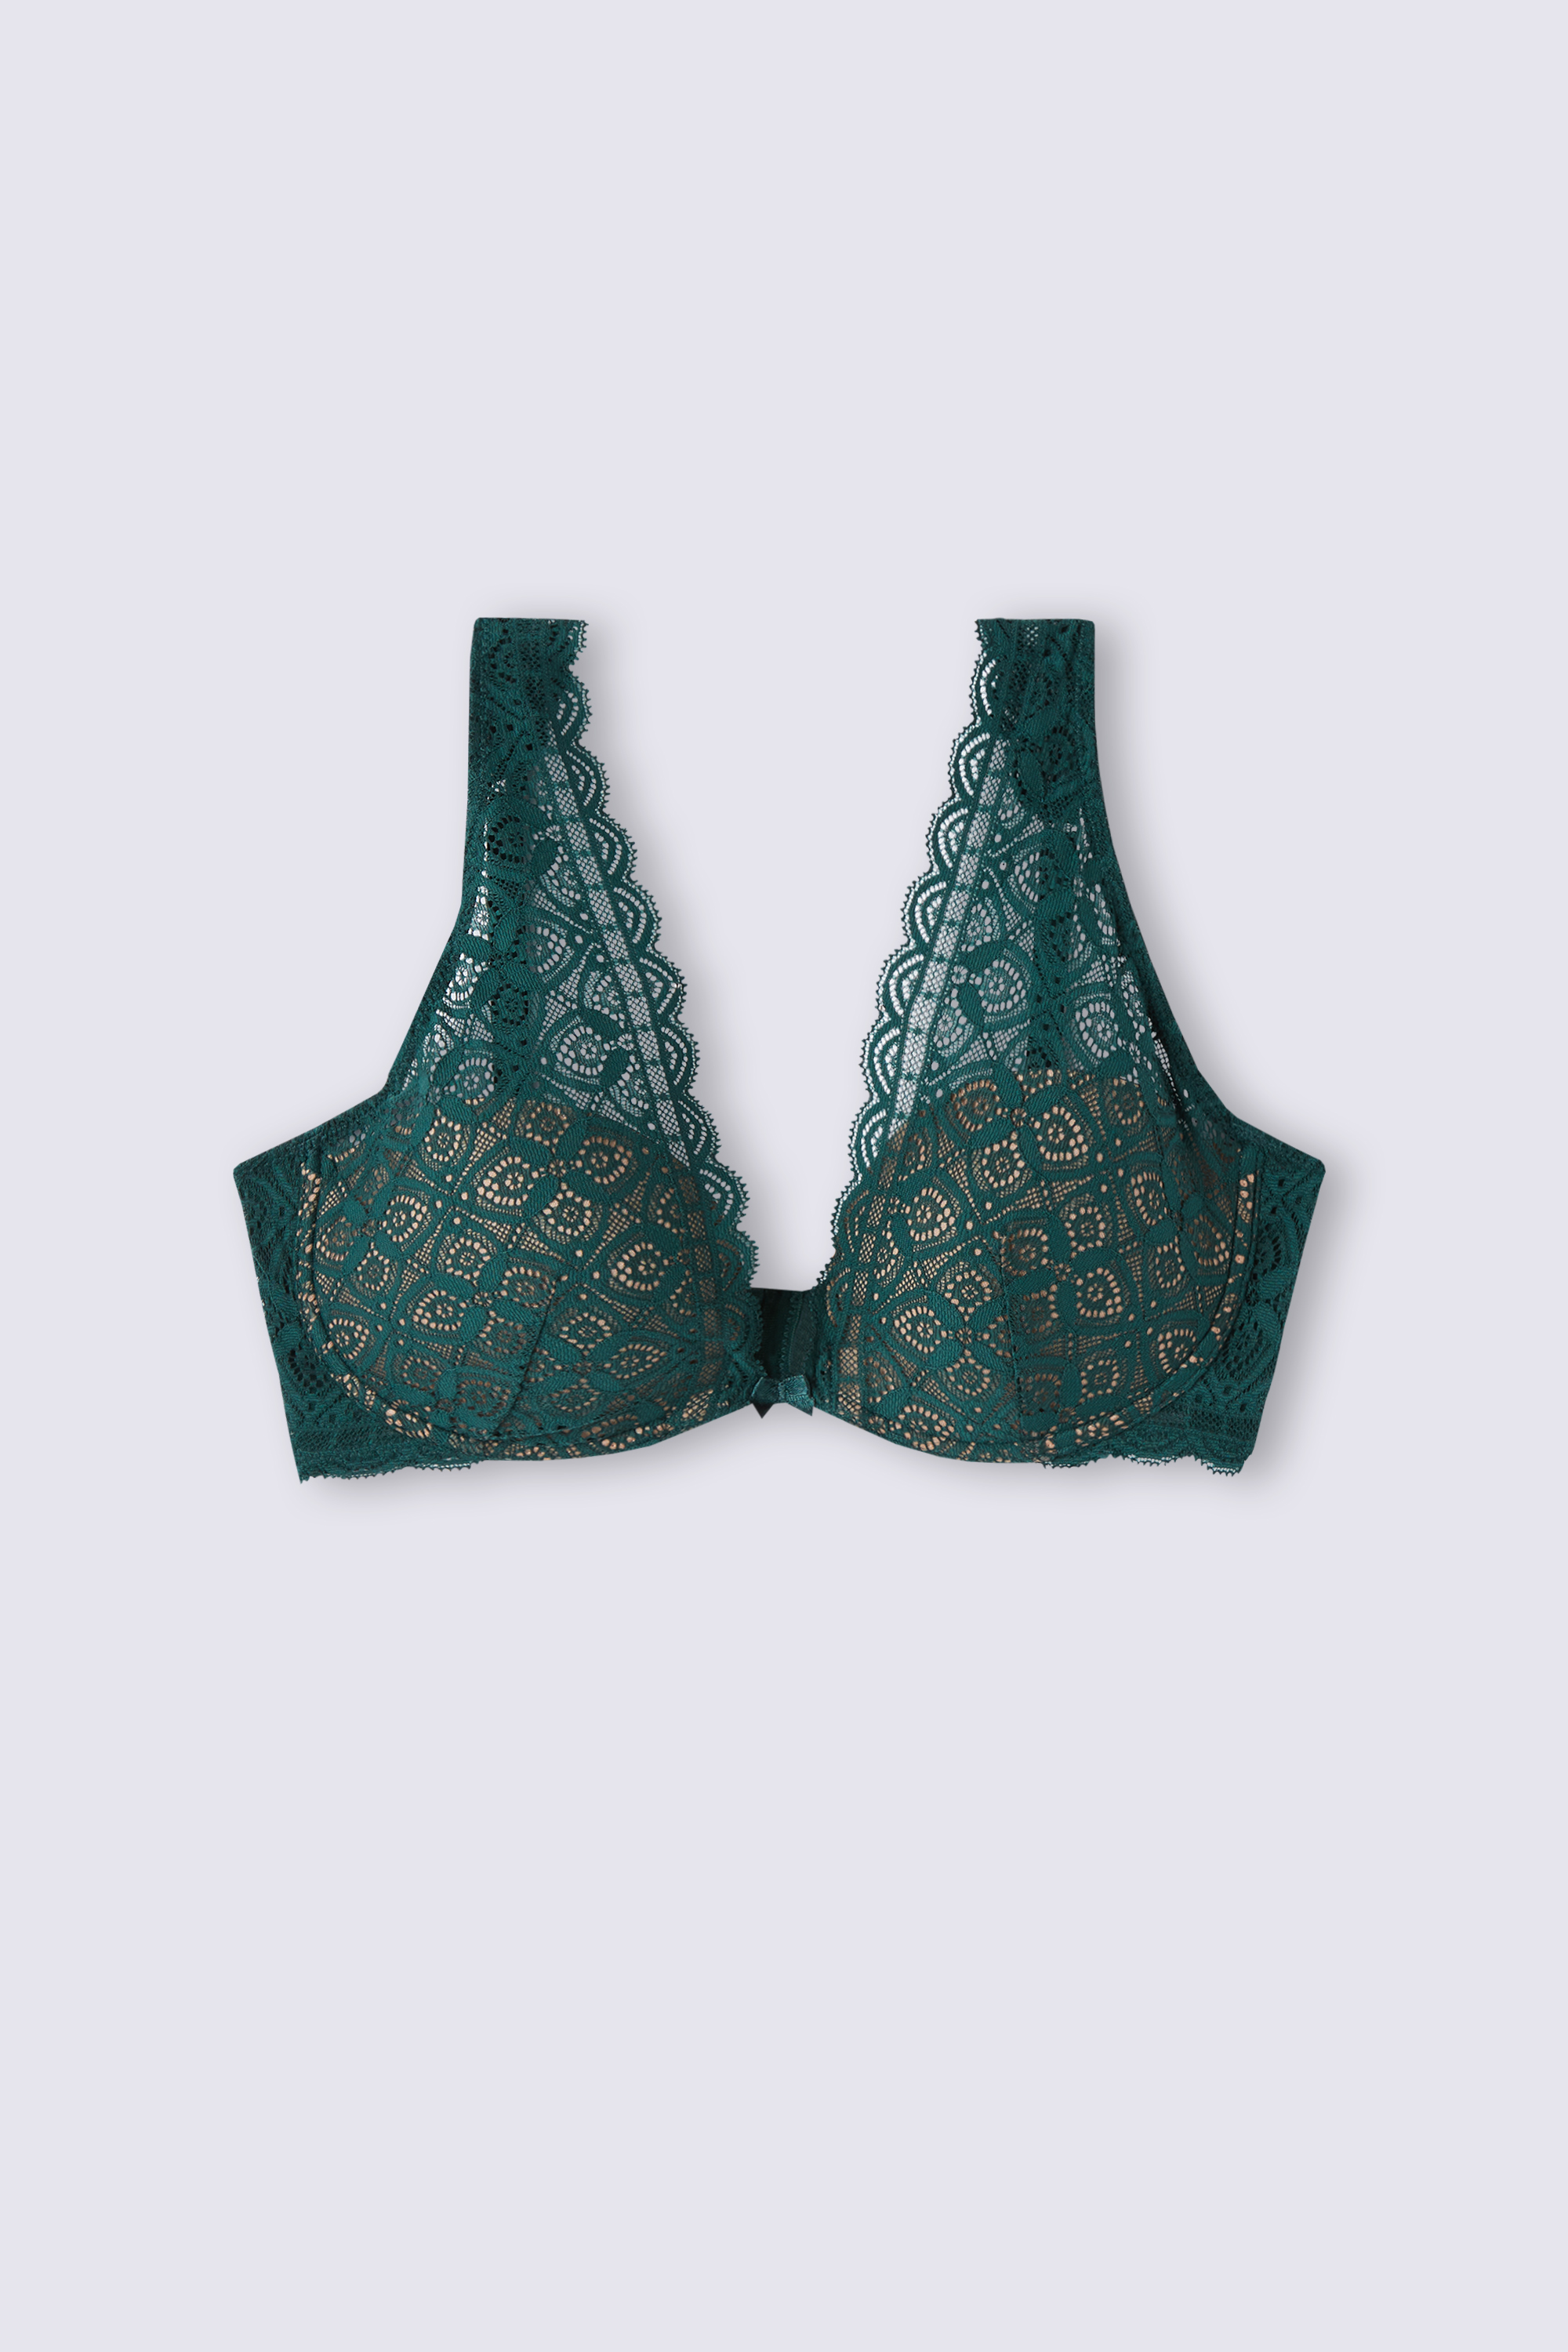 Cute lace bra from Sabina., Gallery posted by Ellepch